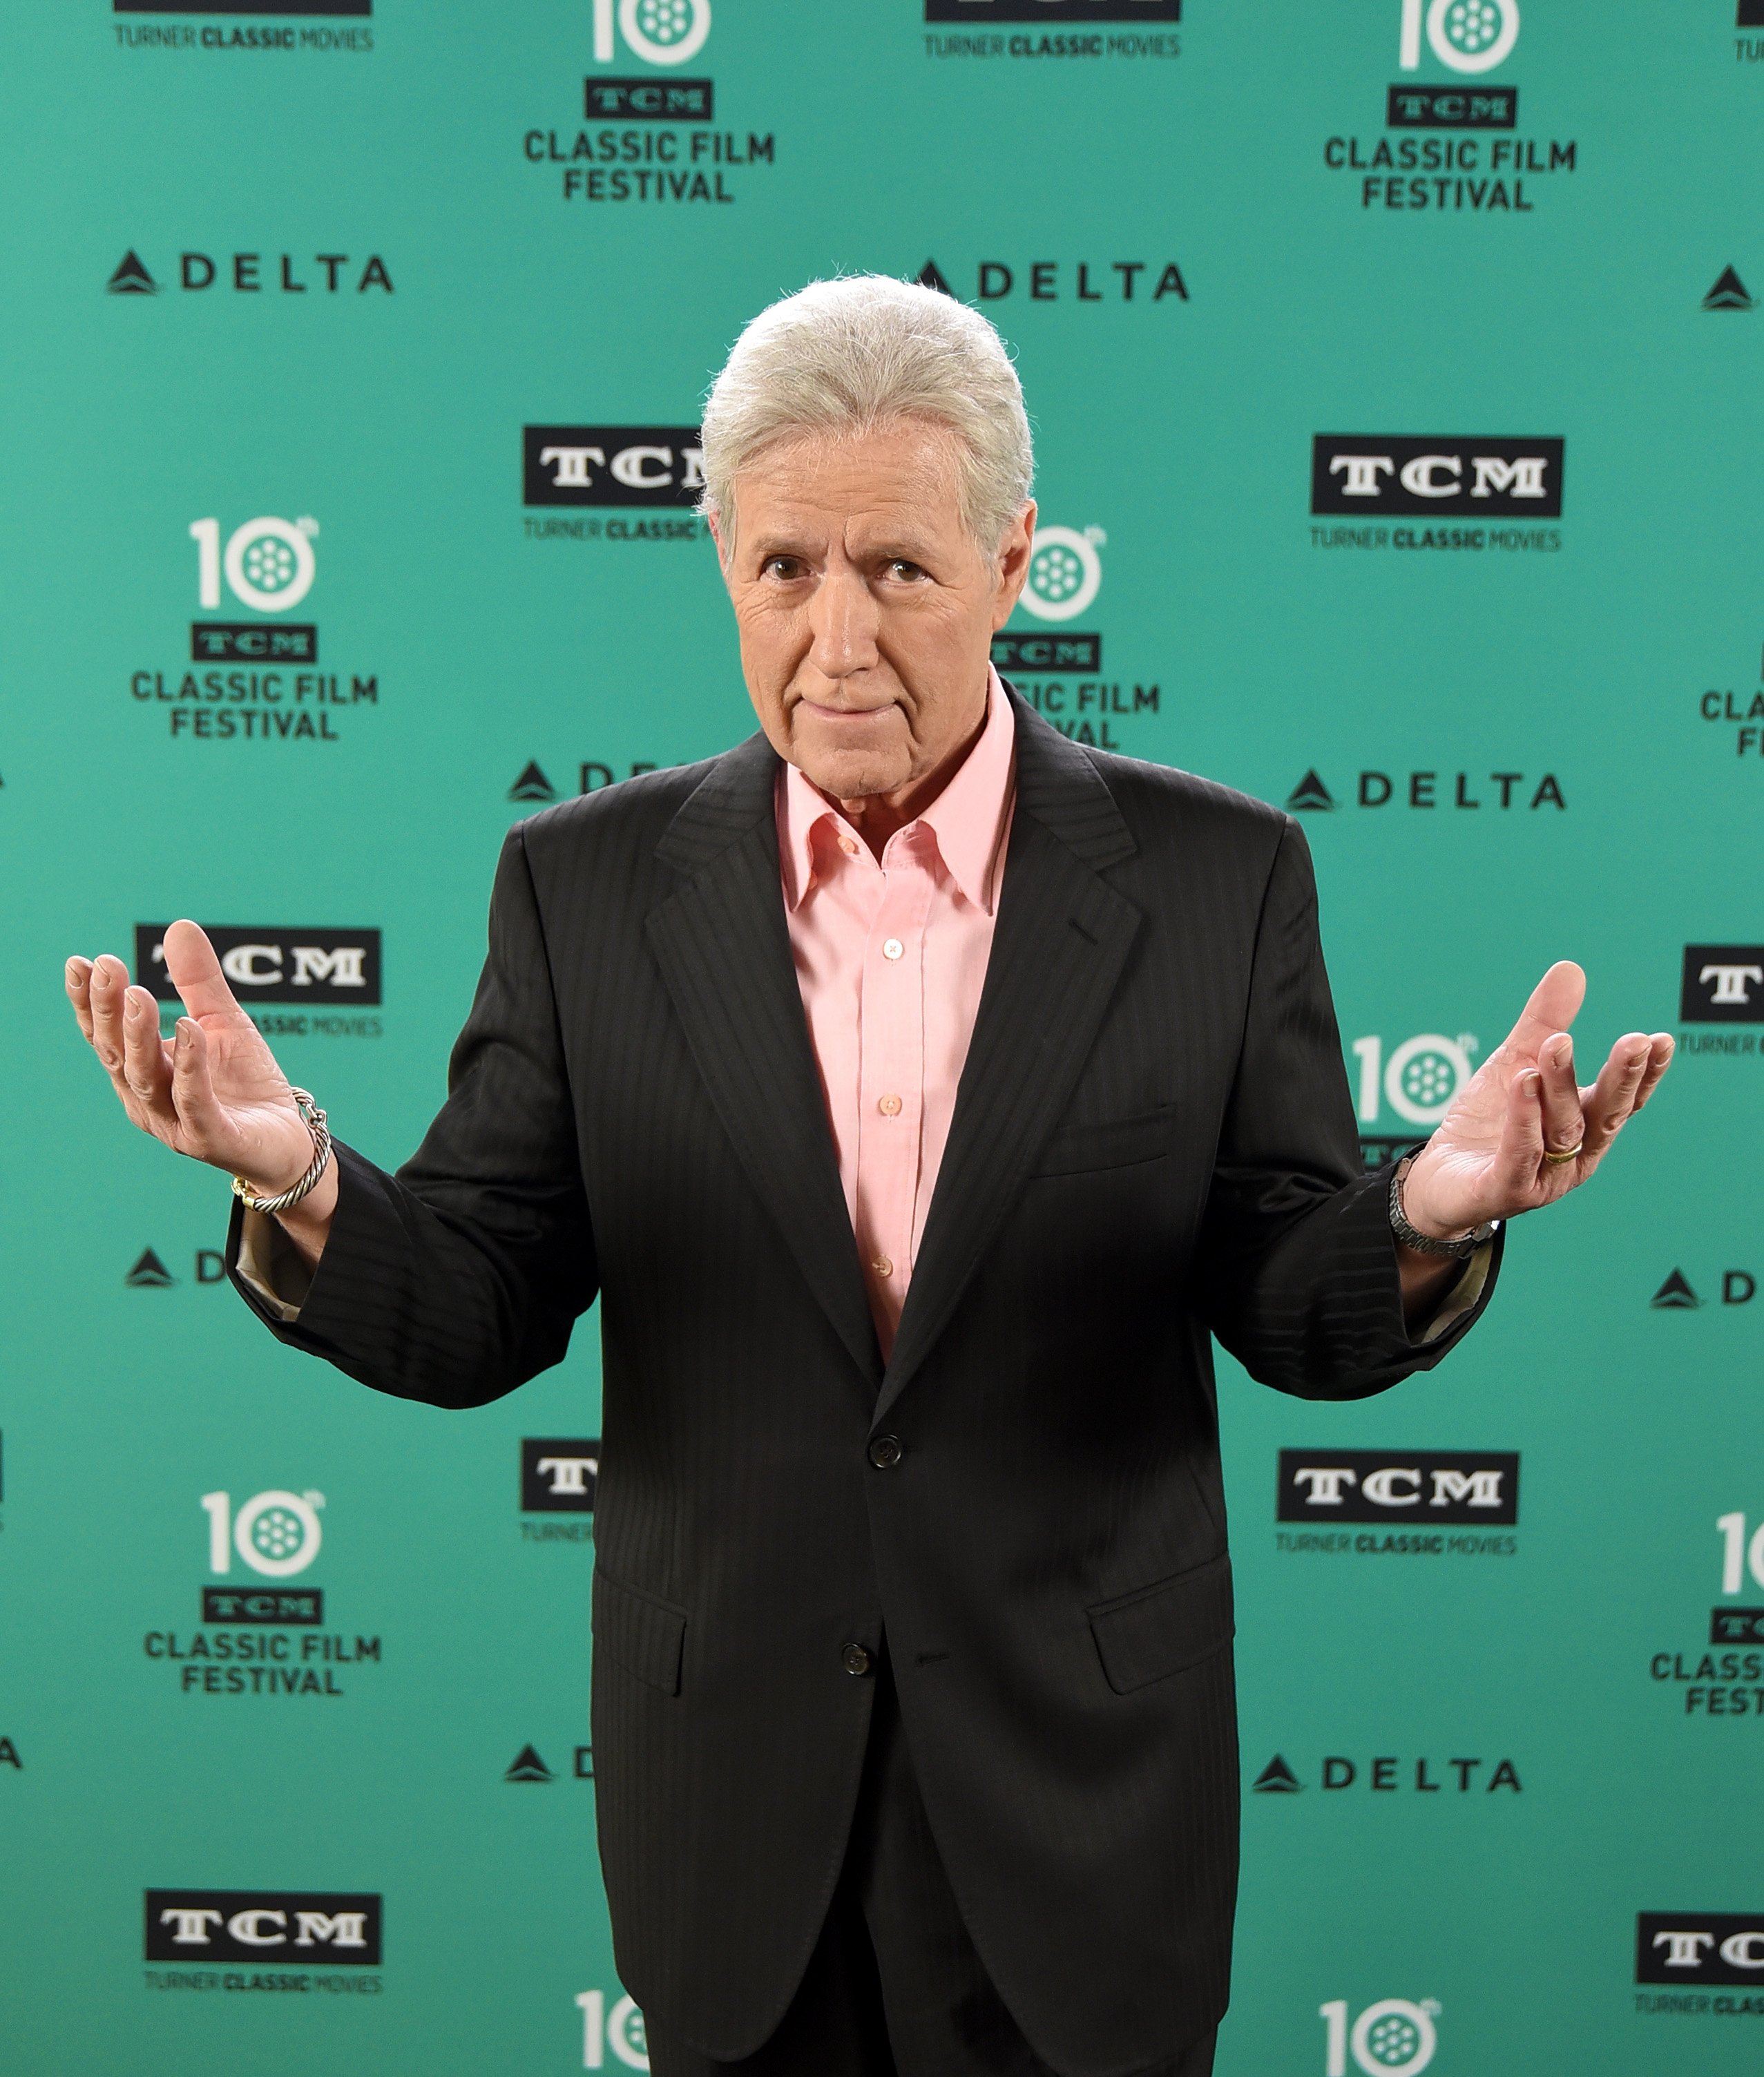 Alex Trebek attends the screening of "Wuthering Heights" in Hollywood, California on April 13, 2019 | Photo: Getty Images